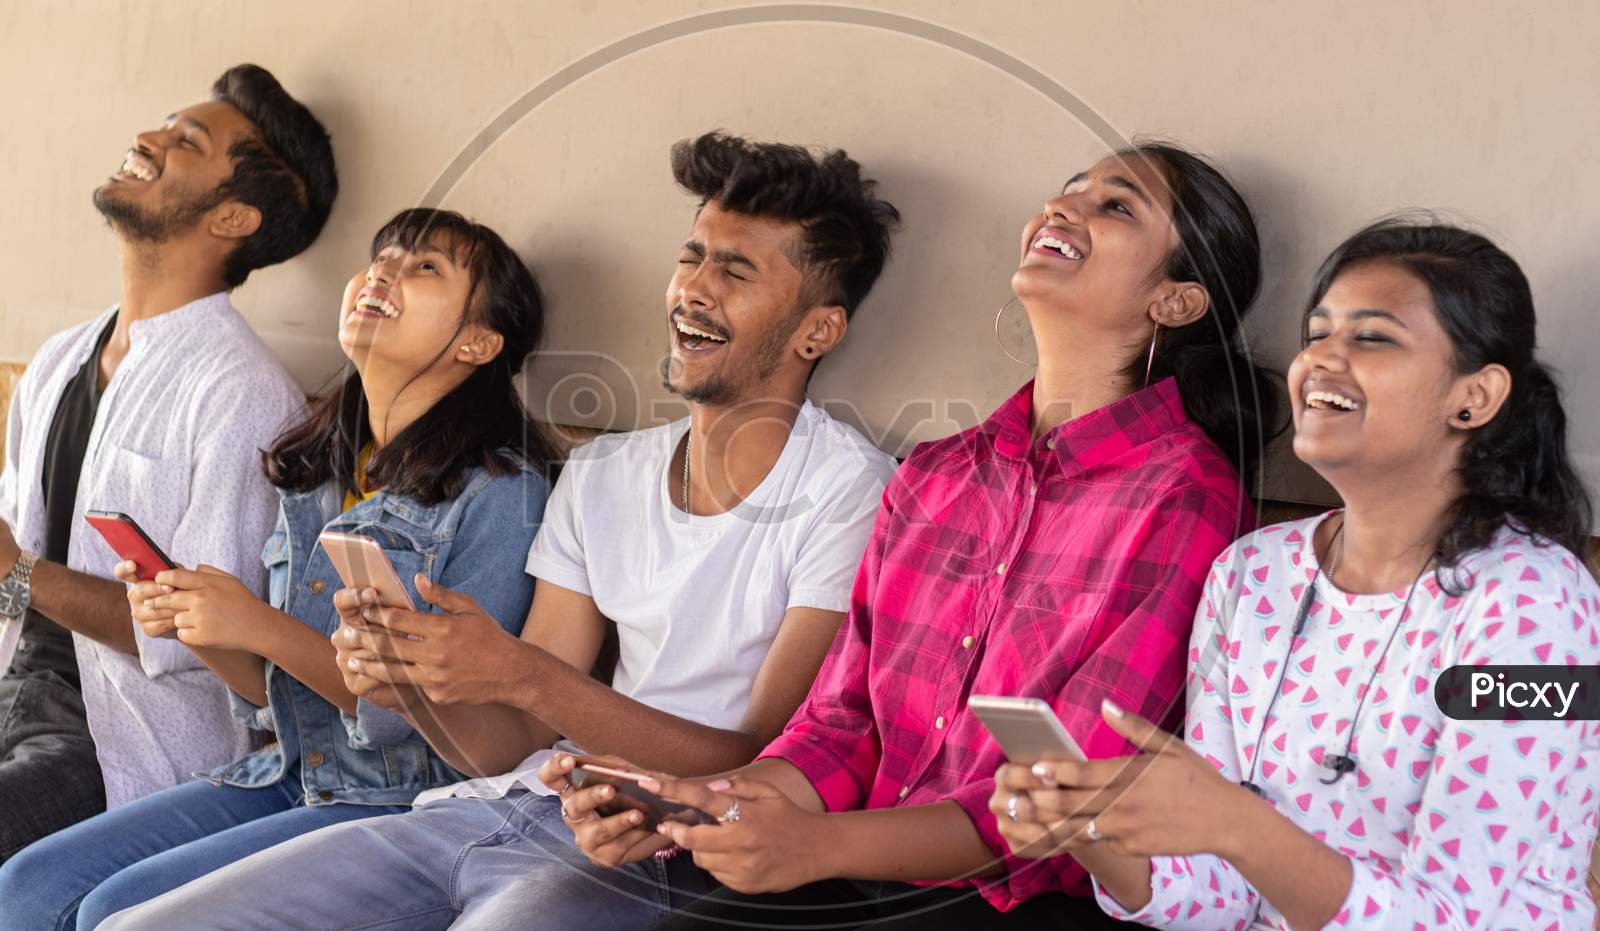 Group Of Happy Young Boys and Girls By Looking At Mobile Phone Laughing Loudly At University Campus - Millennials Enjoying Online Video Content Or Social Media By Watching Smart Phone.